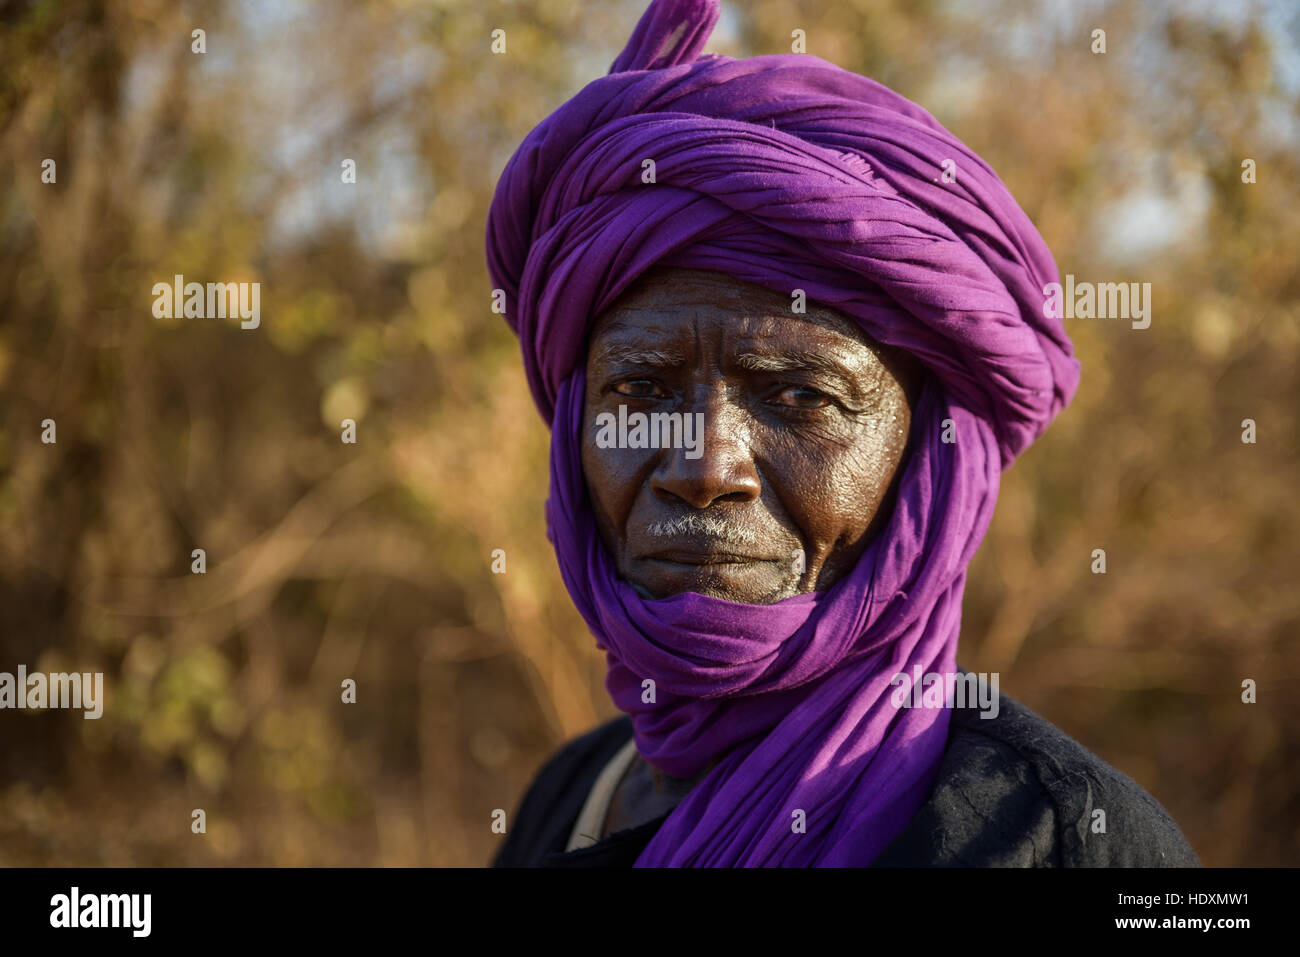 A man from the Peul ethnic group of The Gambia Stock Photo